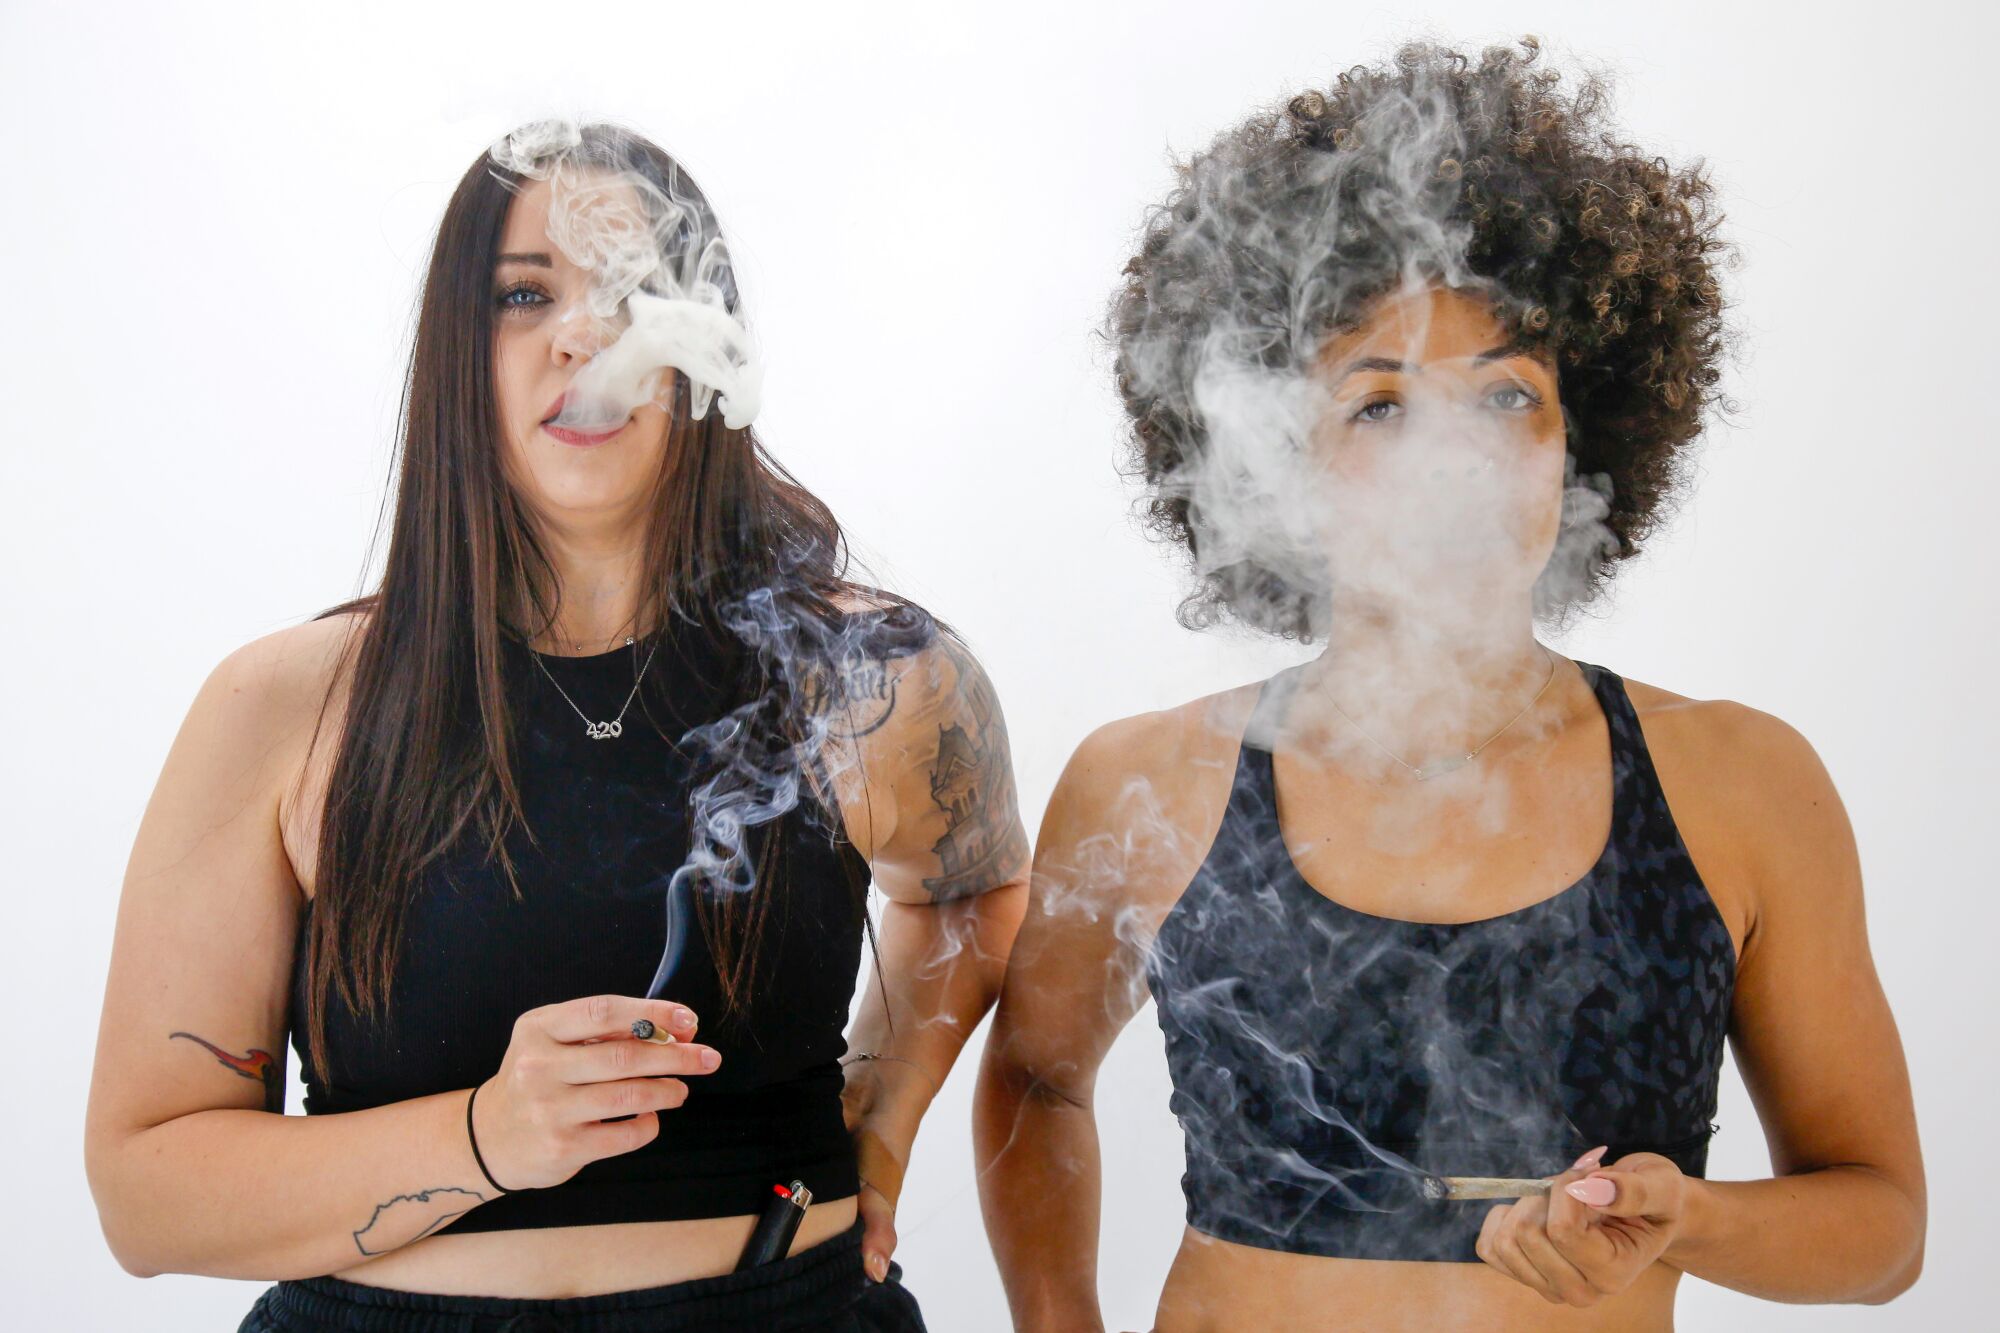 Stoned + Toned instructors Morgan English, left, and Bree Deanine take a hit at the start of their online workout.